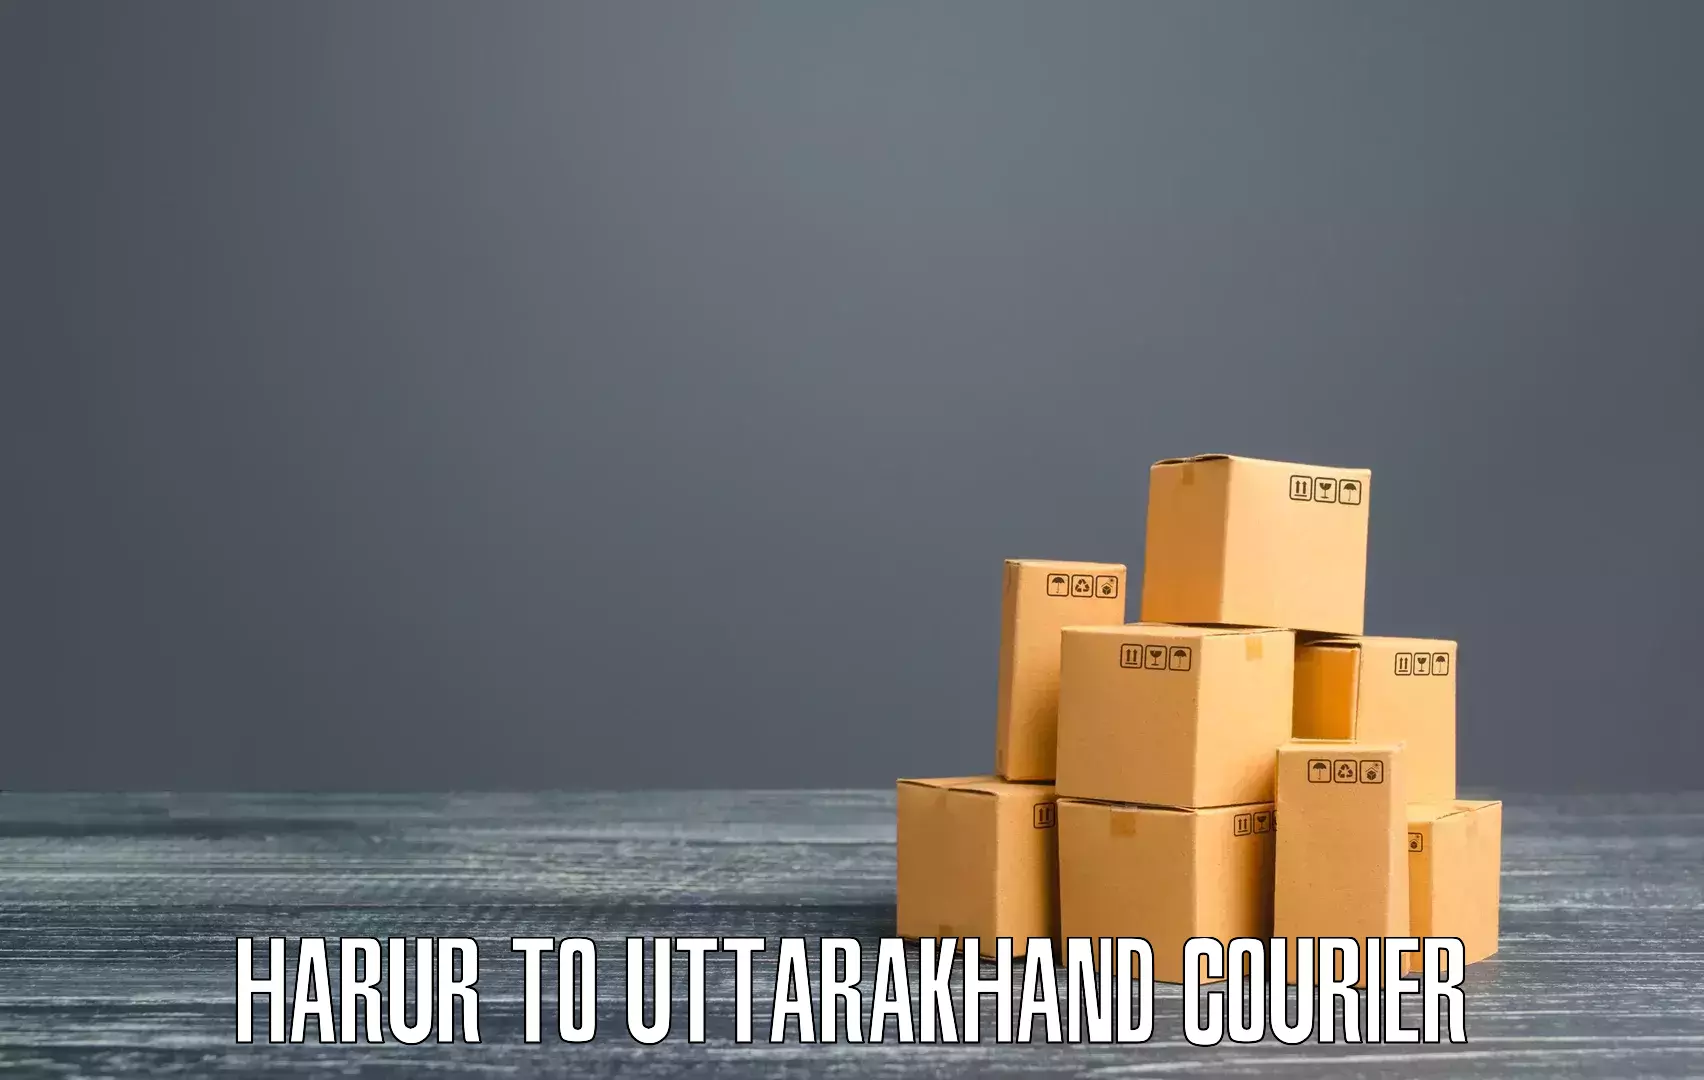 Large package courier Harur to Lansdowne